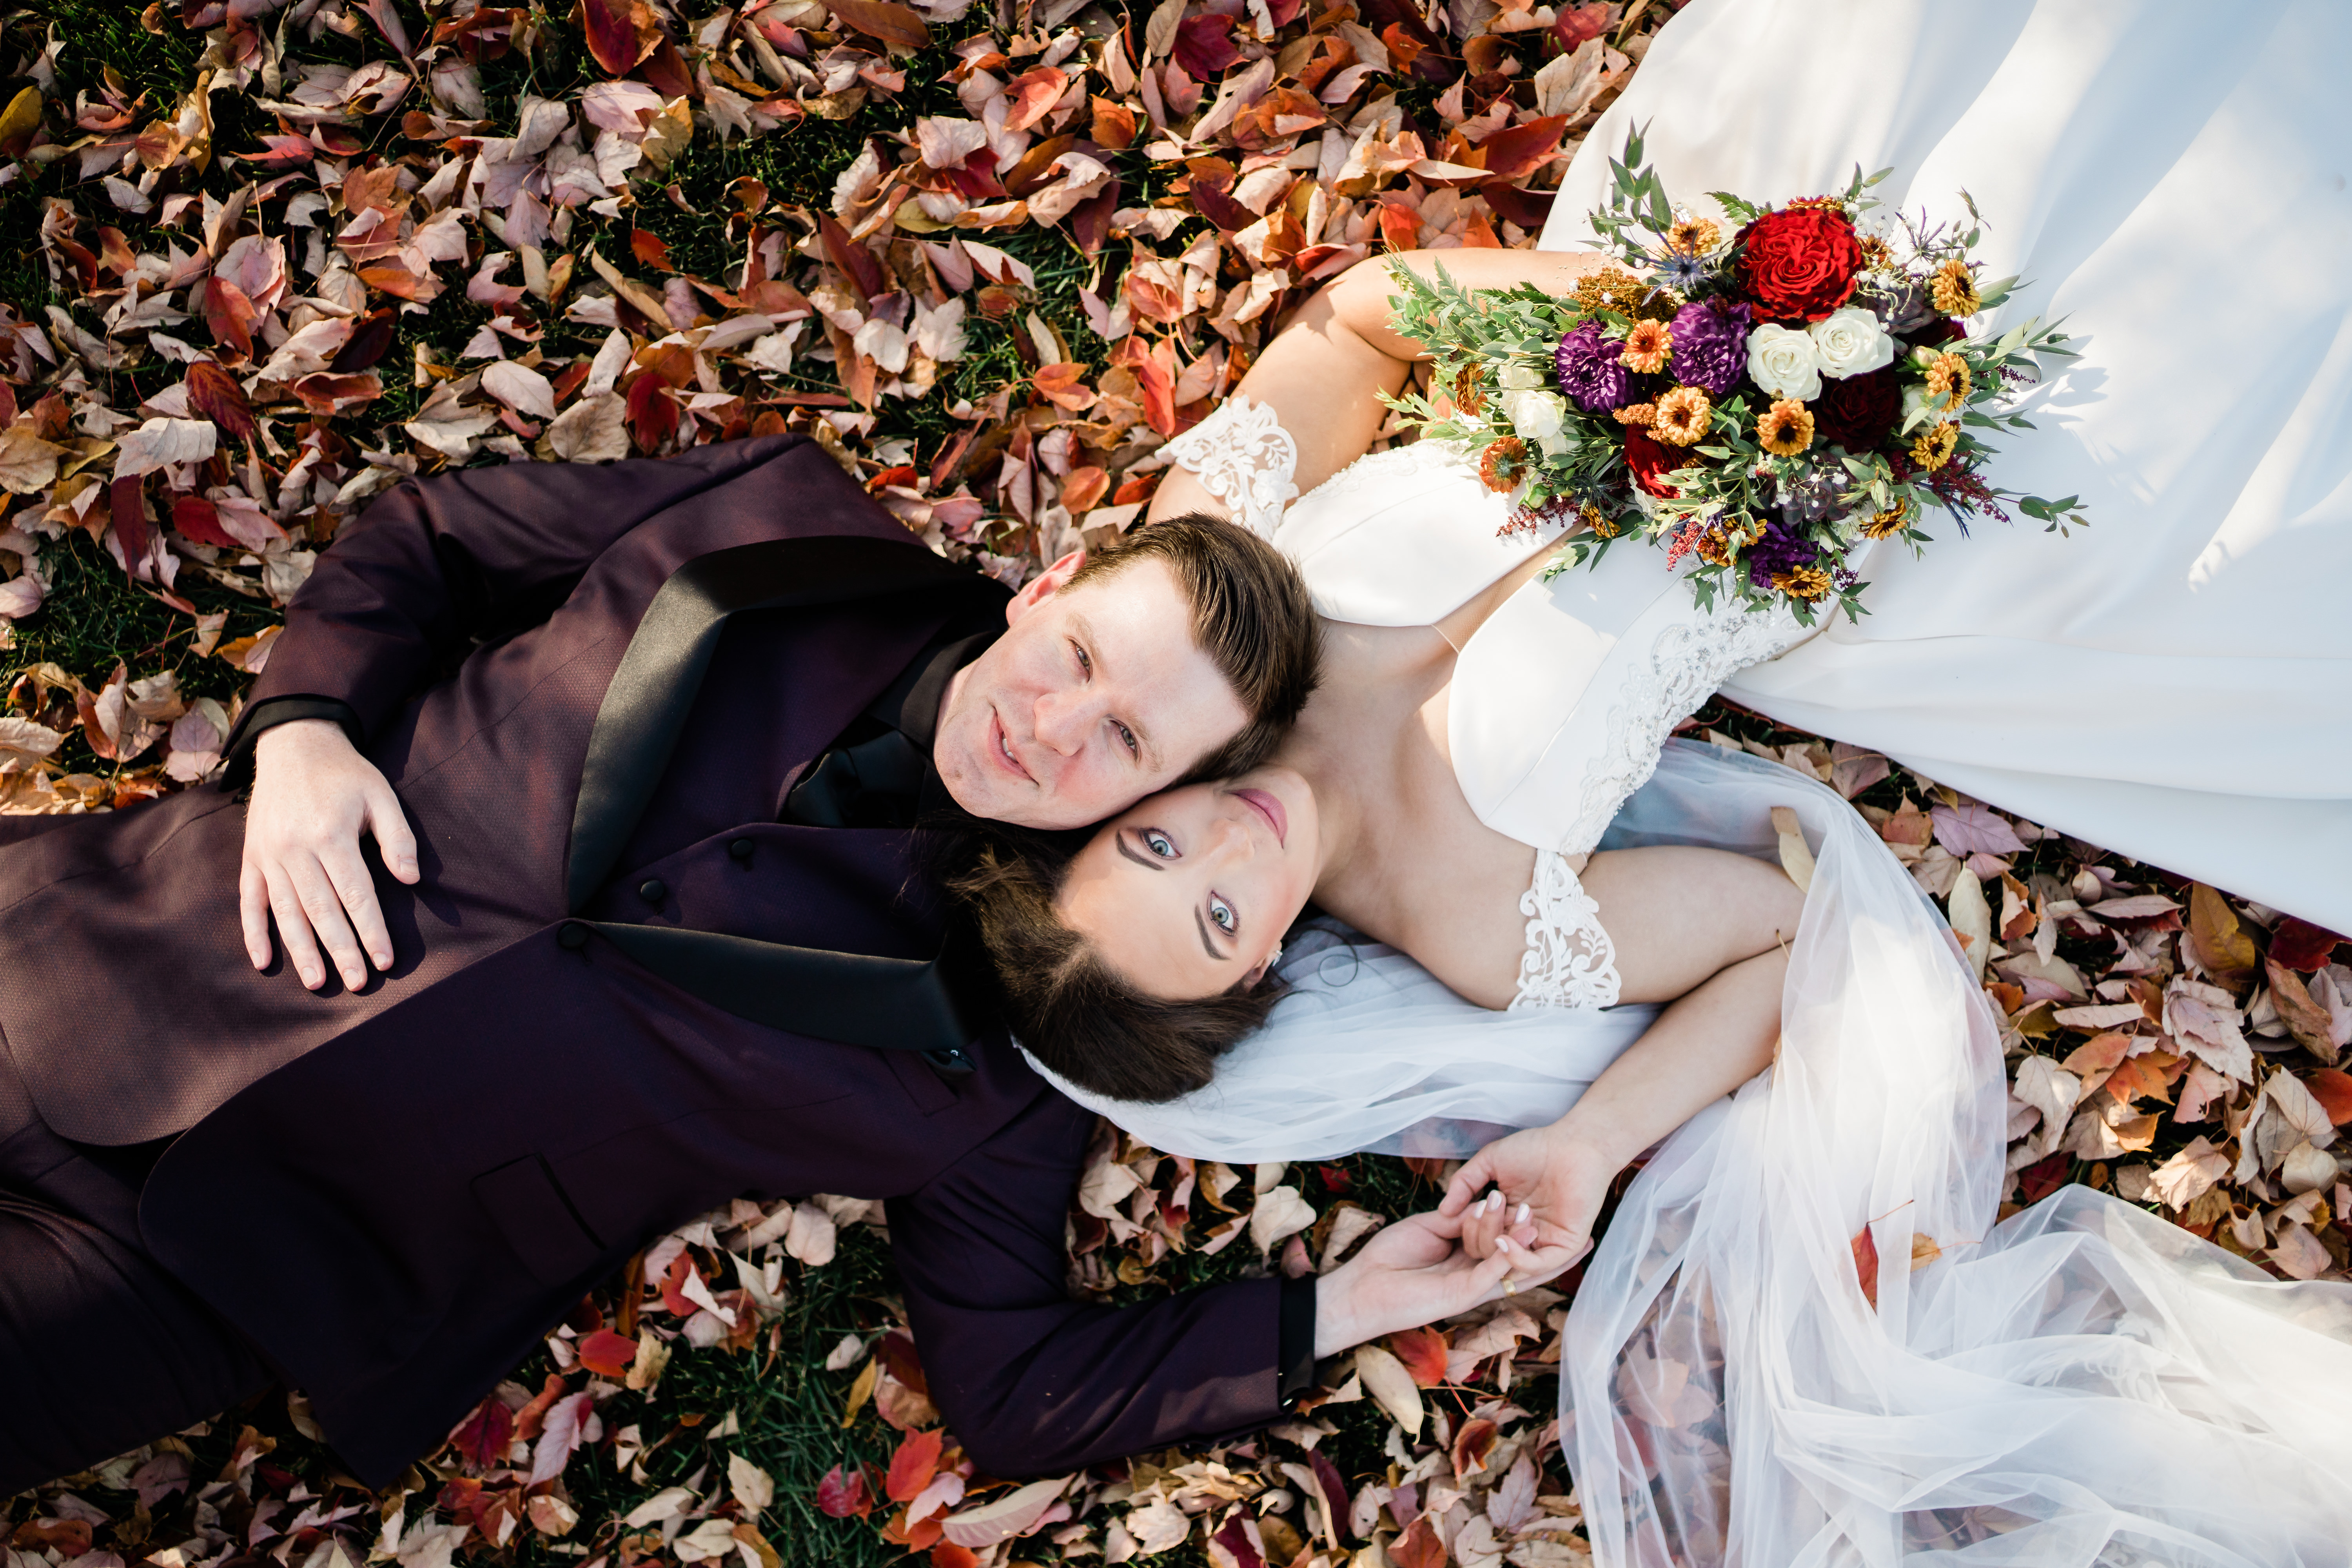 bride and groom laying in leaves on ground before wedding reception